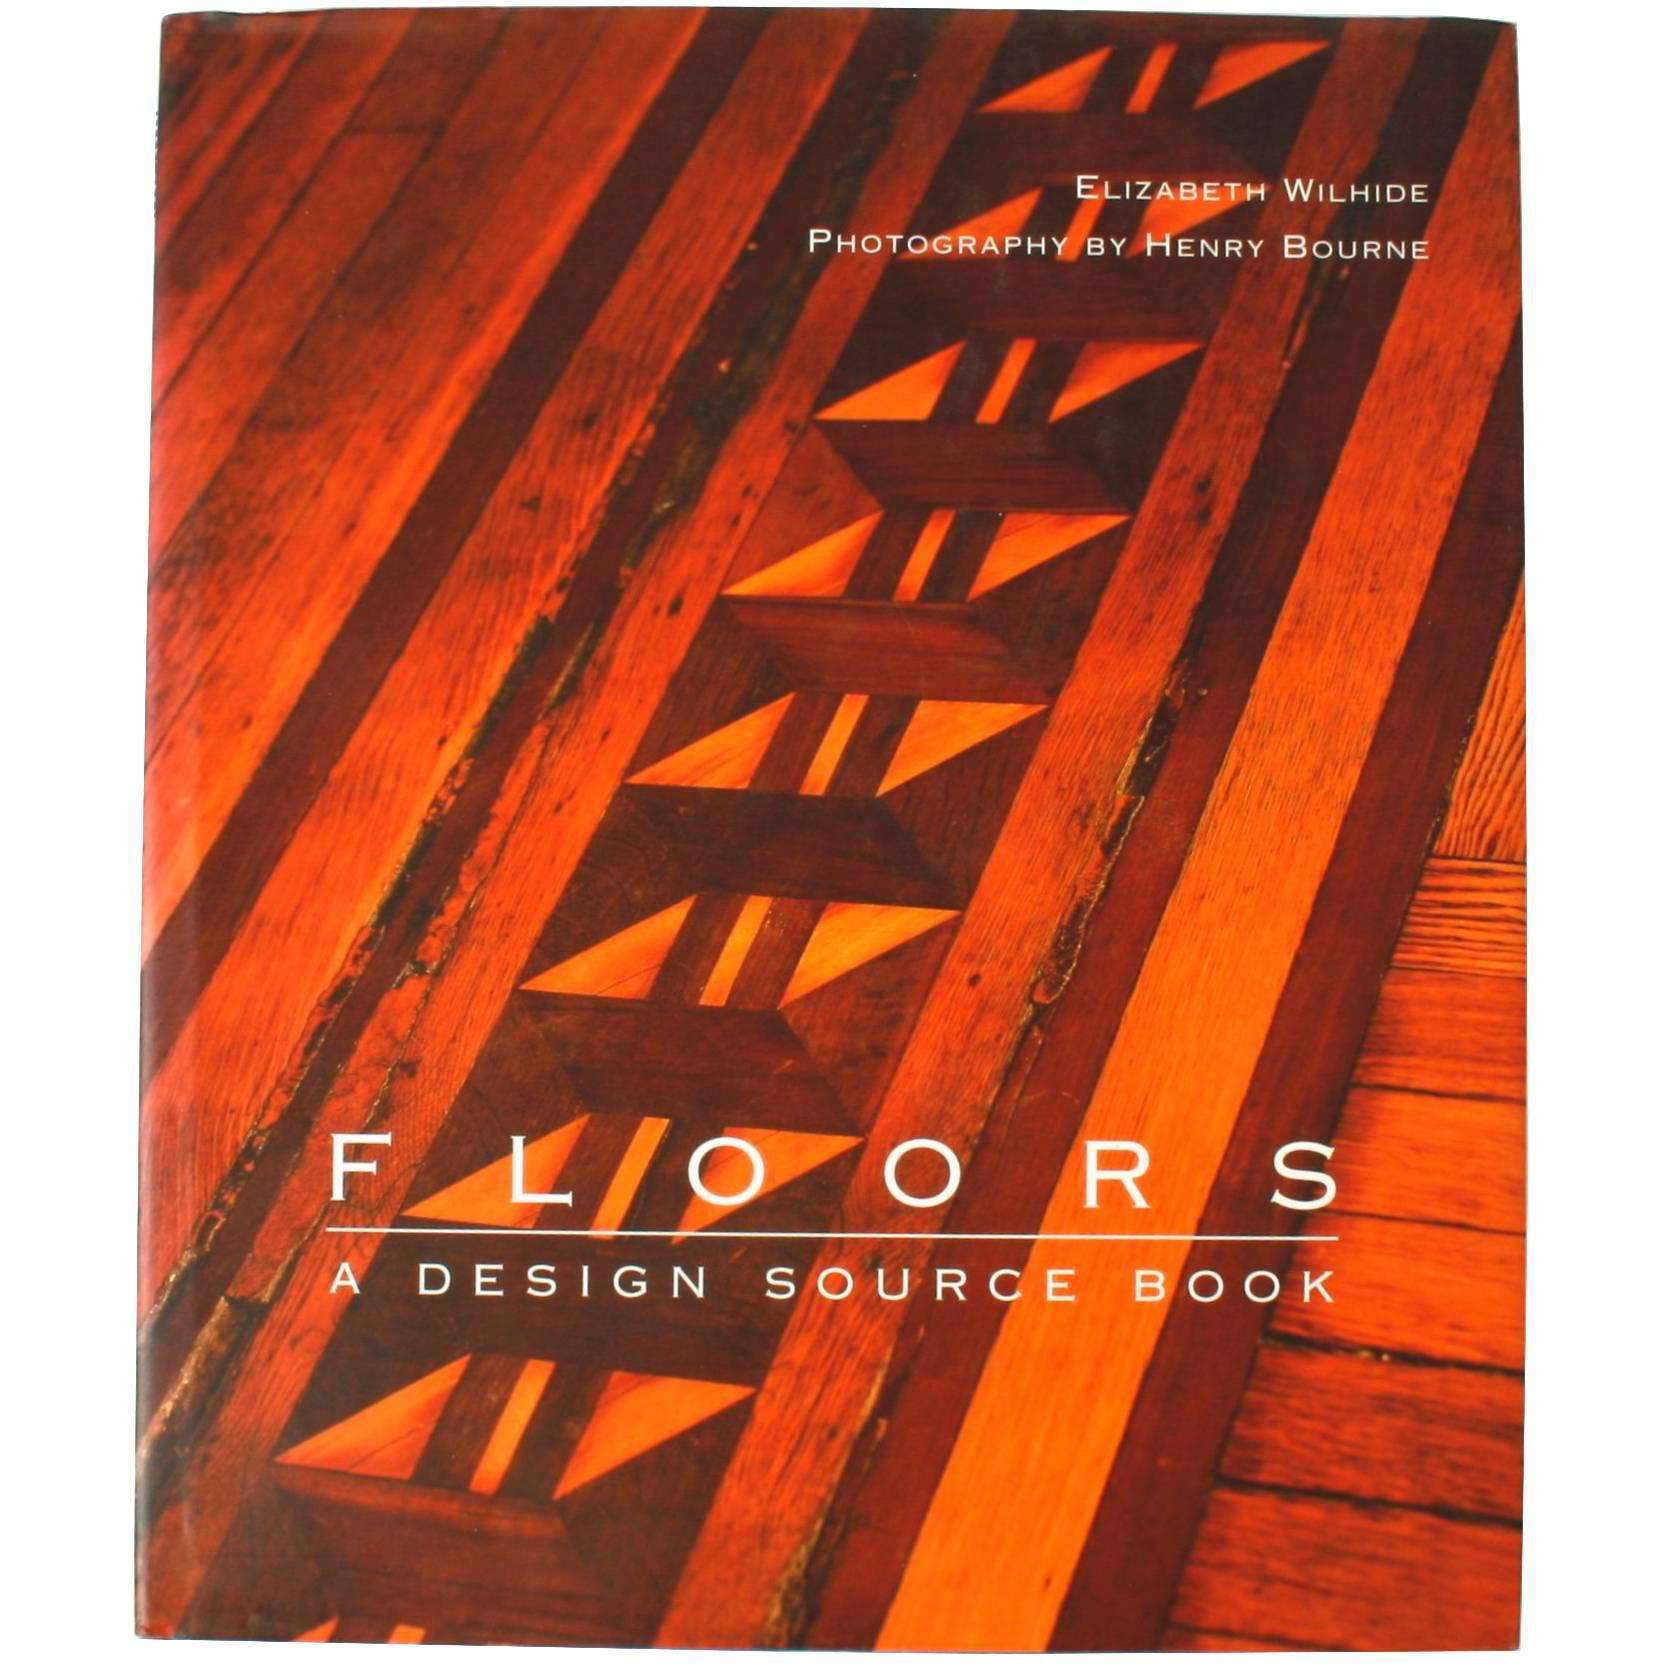 Floors, a Design Source Book by Elizabeth Wilhide, First Edition For Sale